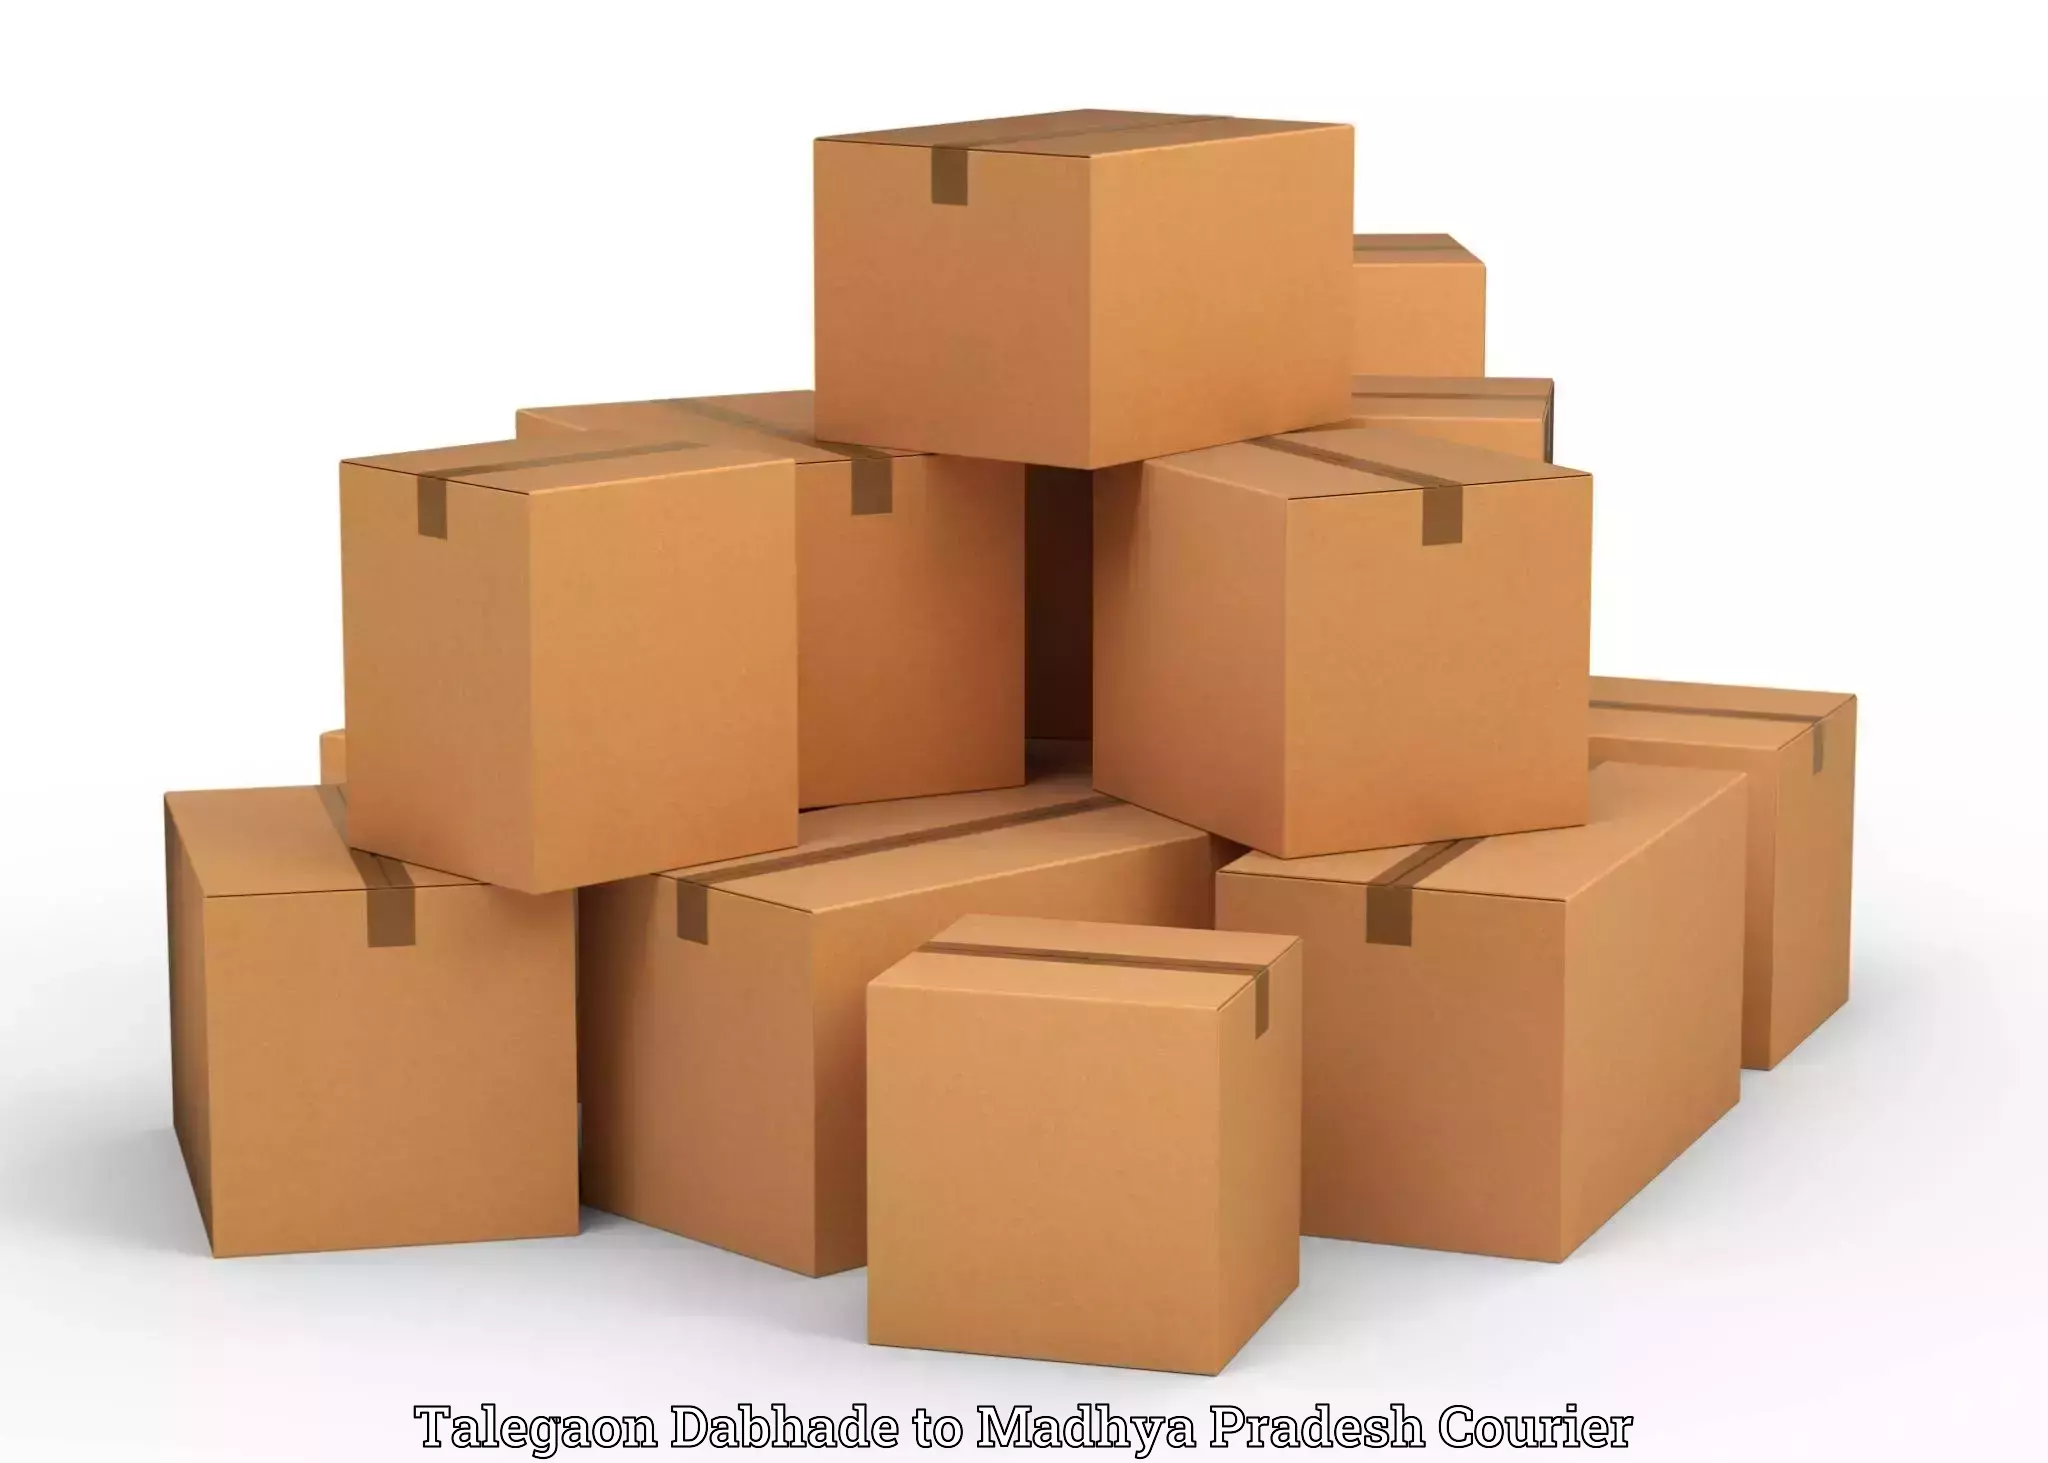 Luggage delivery solutions Talegaon Dabhade to Mandla